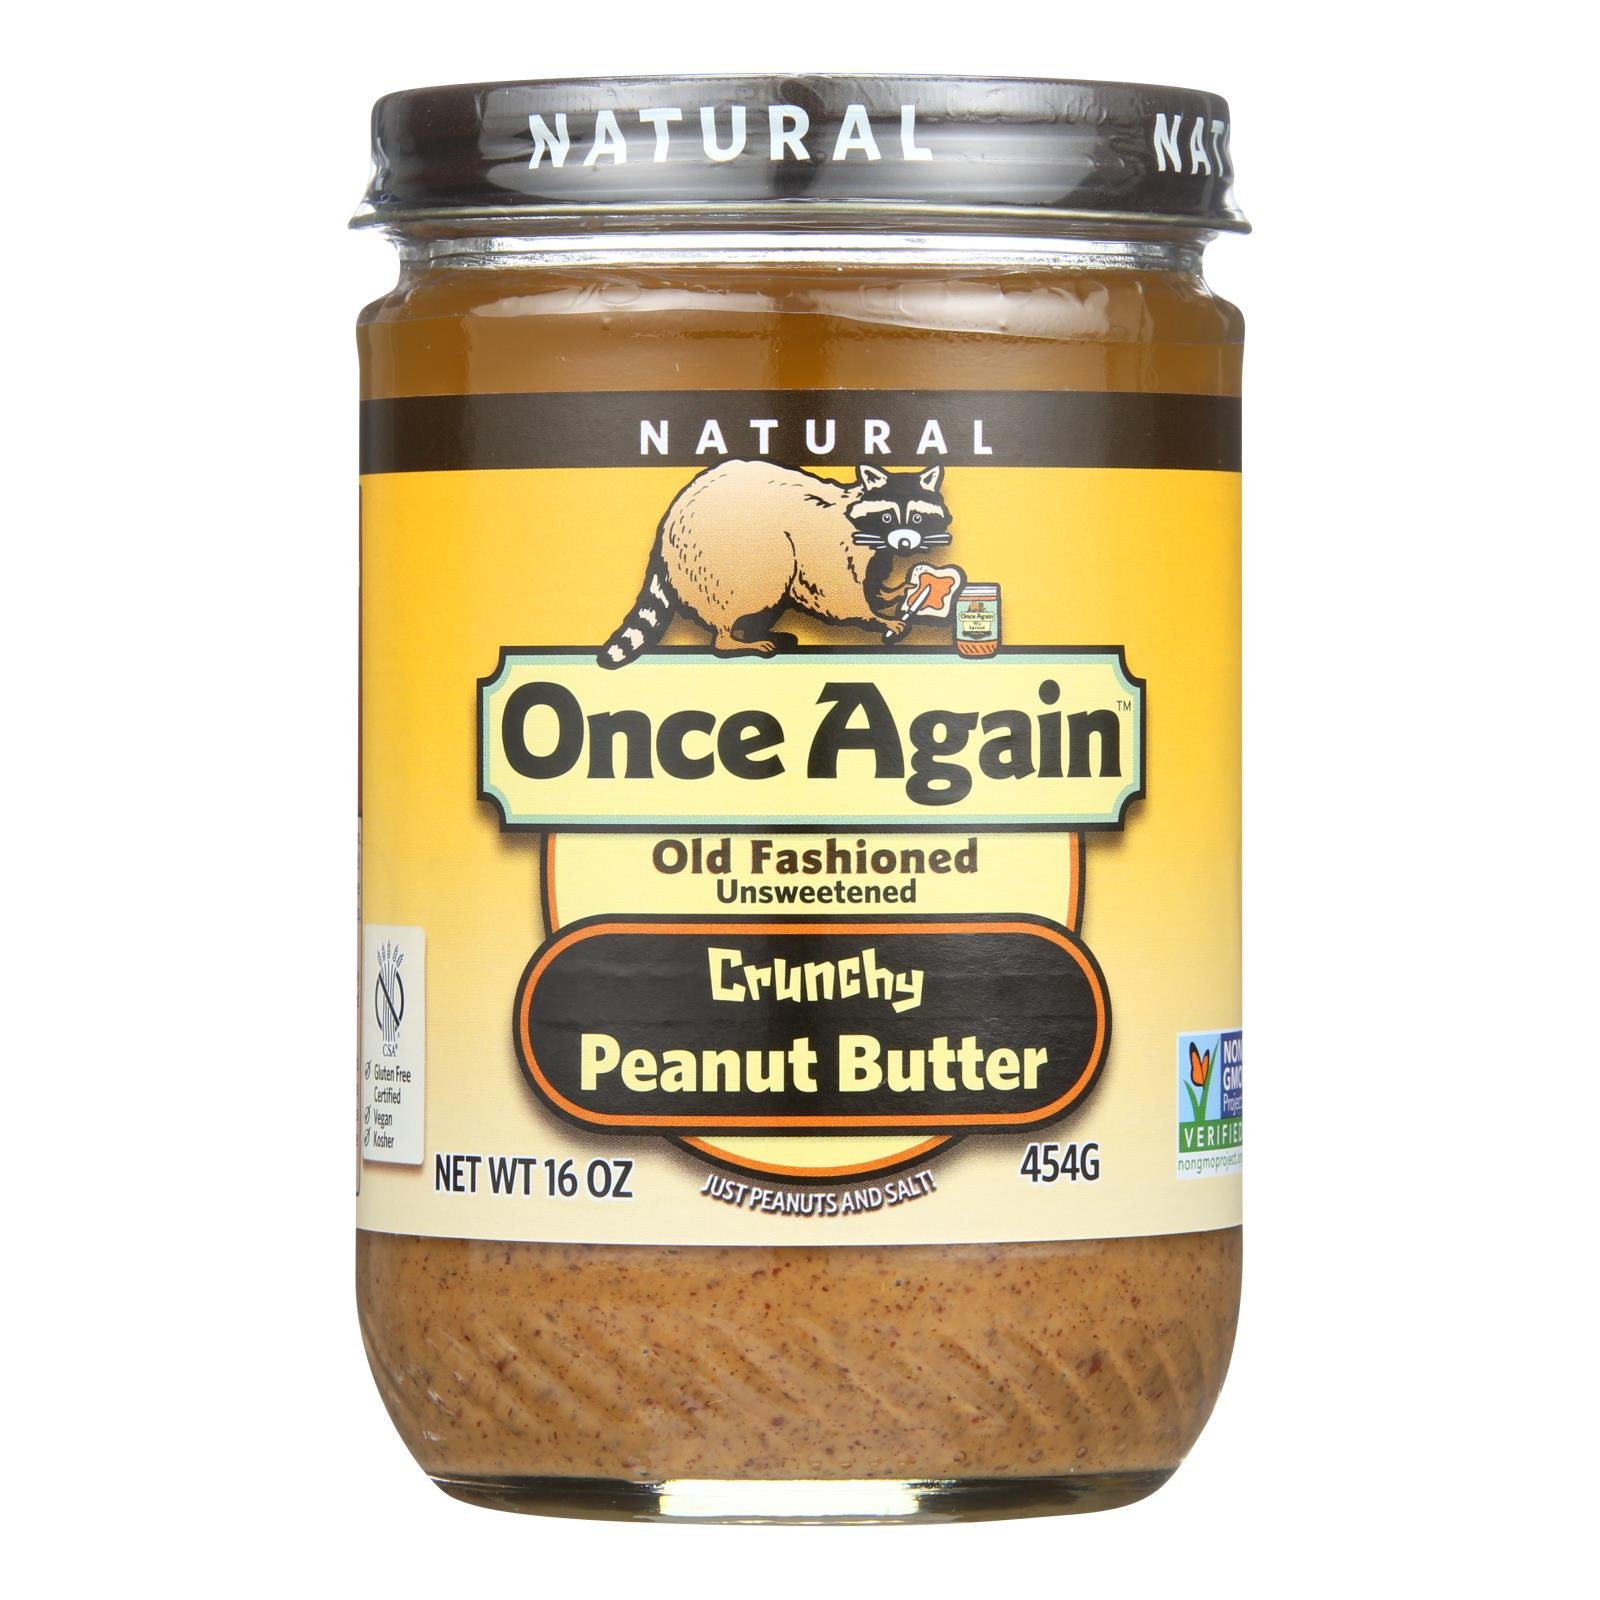 Once Again - Peanut Butter Crunchy Salt - Case Of 6-16 Oz - Whole Green Foods